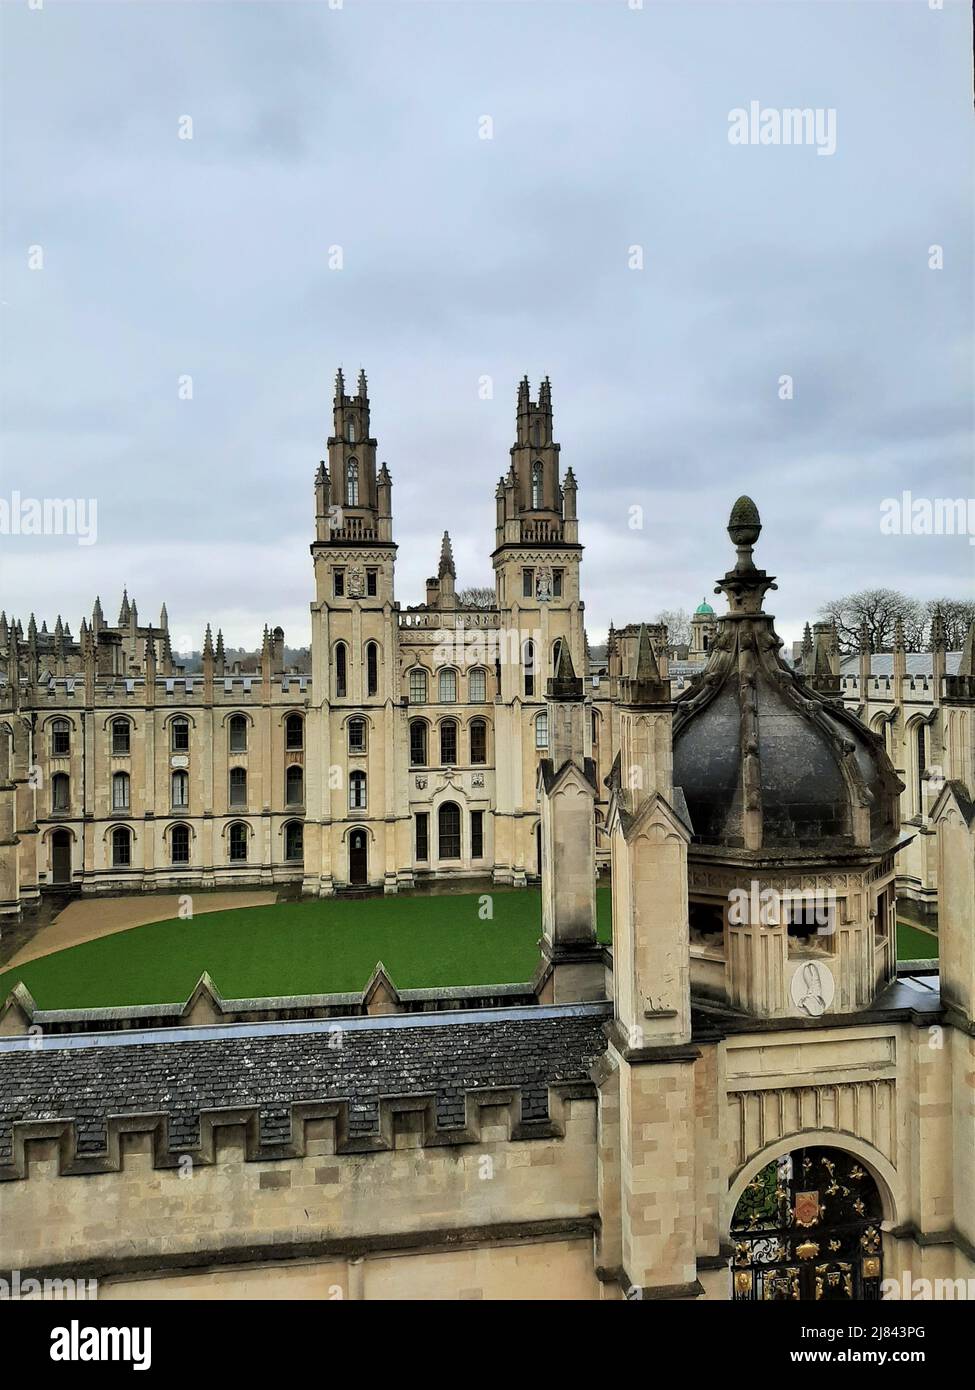 All Souls College, Oxford University. View looking down into the college quad from above. Stock Photo